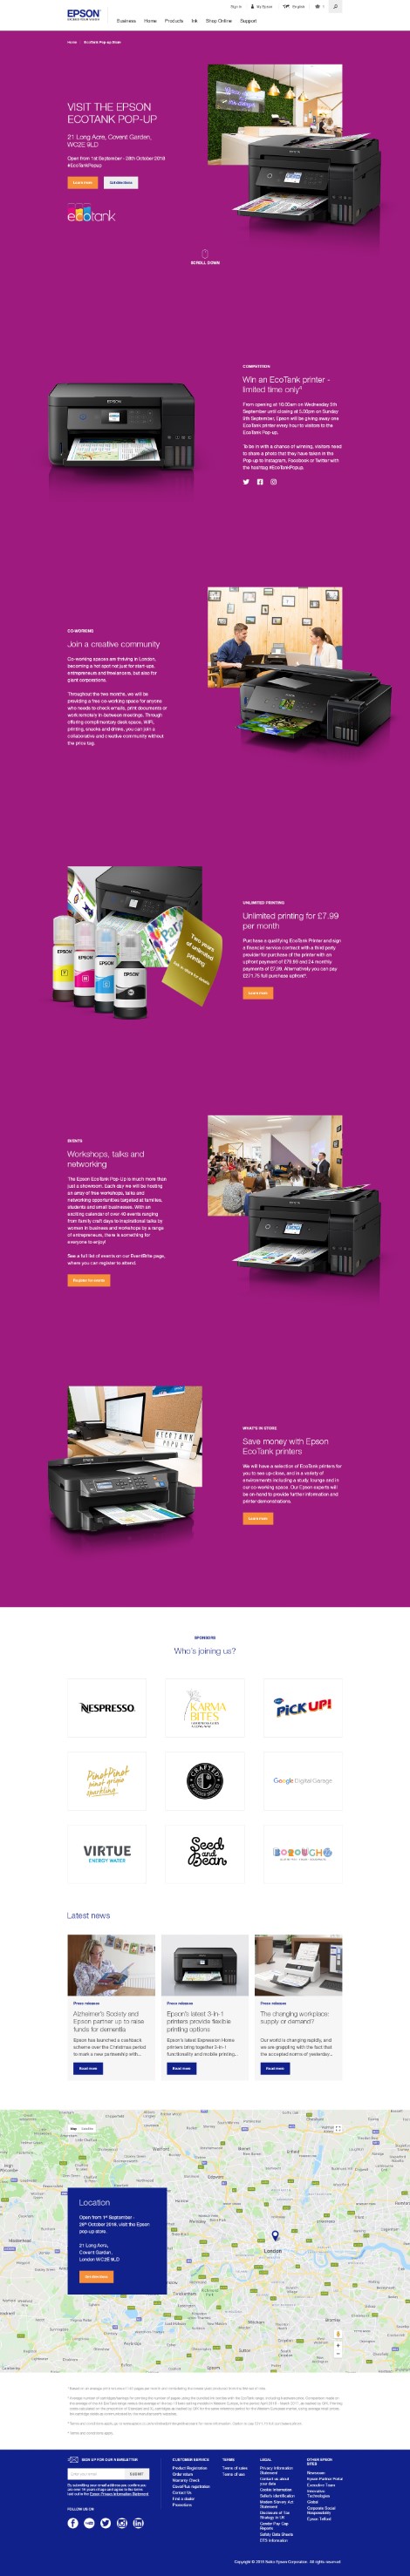 Epson Popup Store Campaign landing page